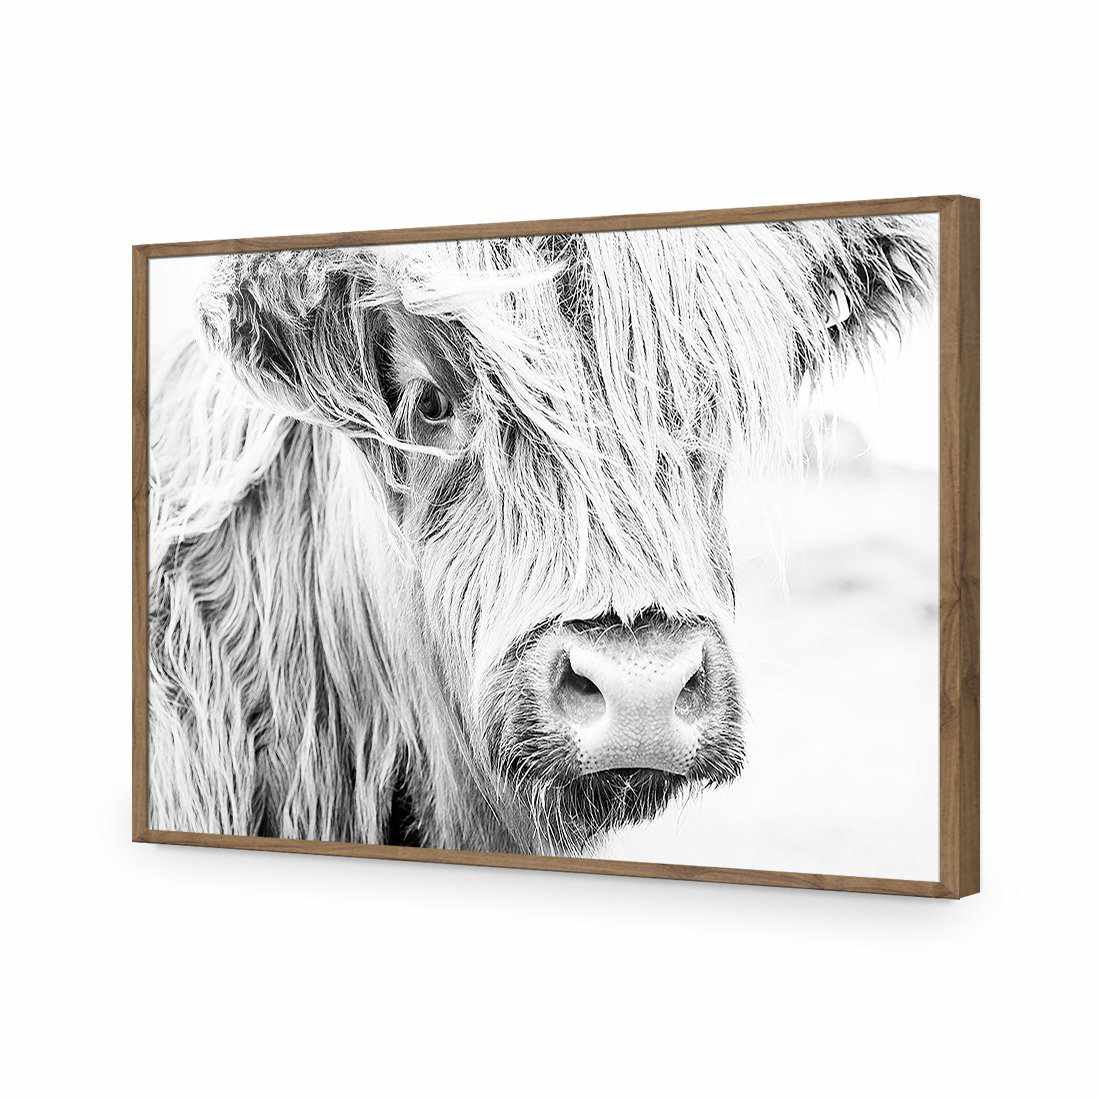 Henrietta the Highland Cow-Acrylic-Wall Art Design-Without Border-Acrylic - Natural Frame-45x30cm-Wall Art Designs